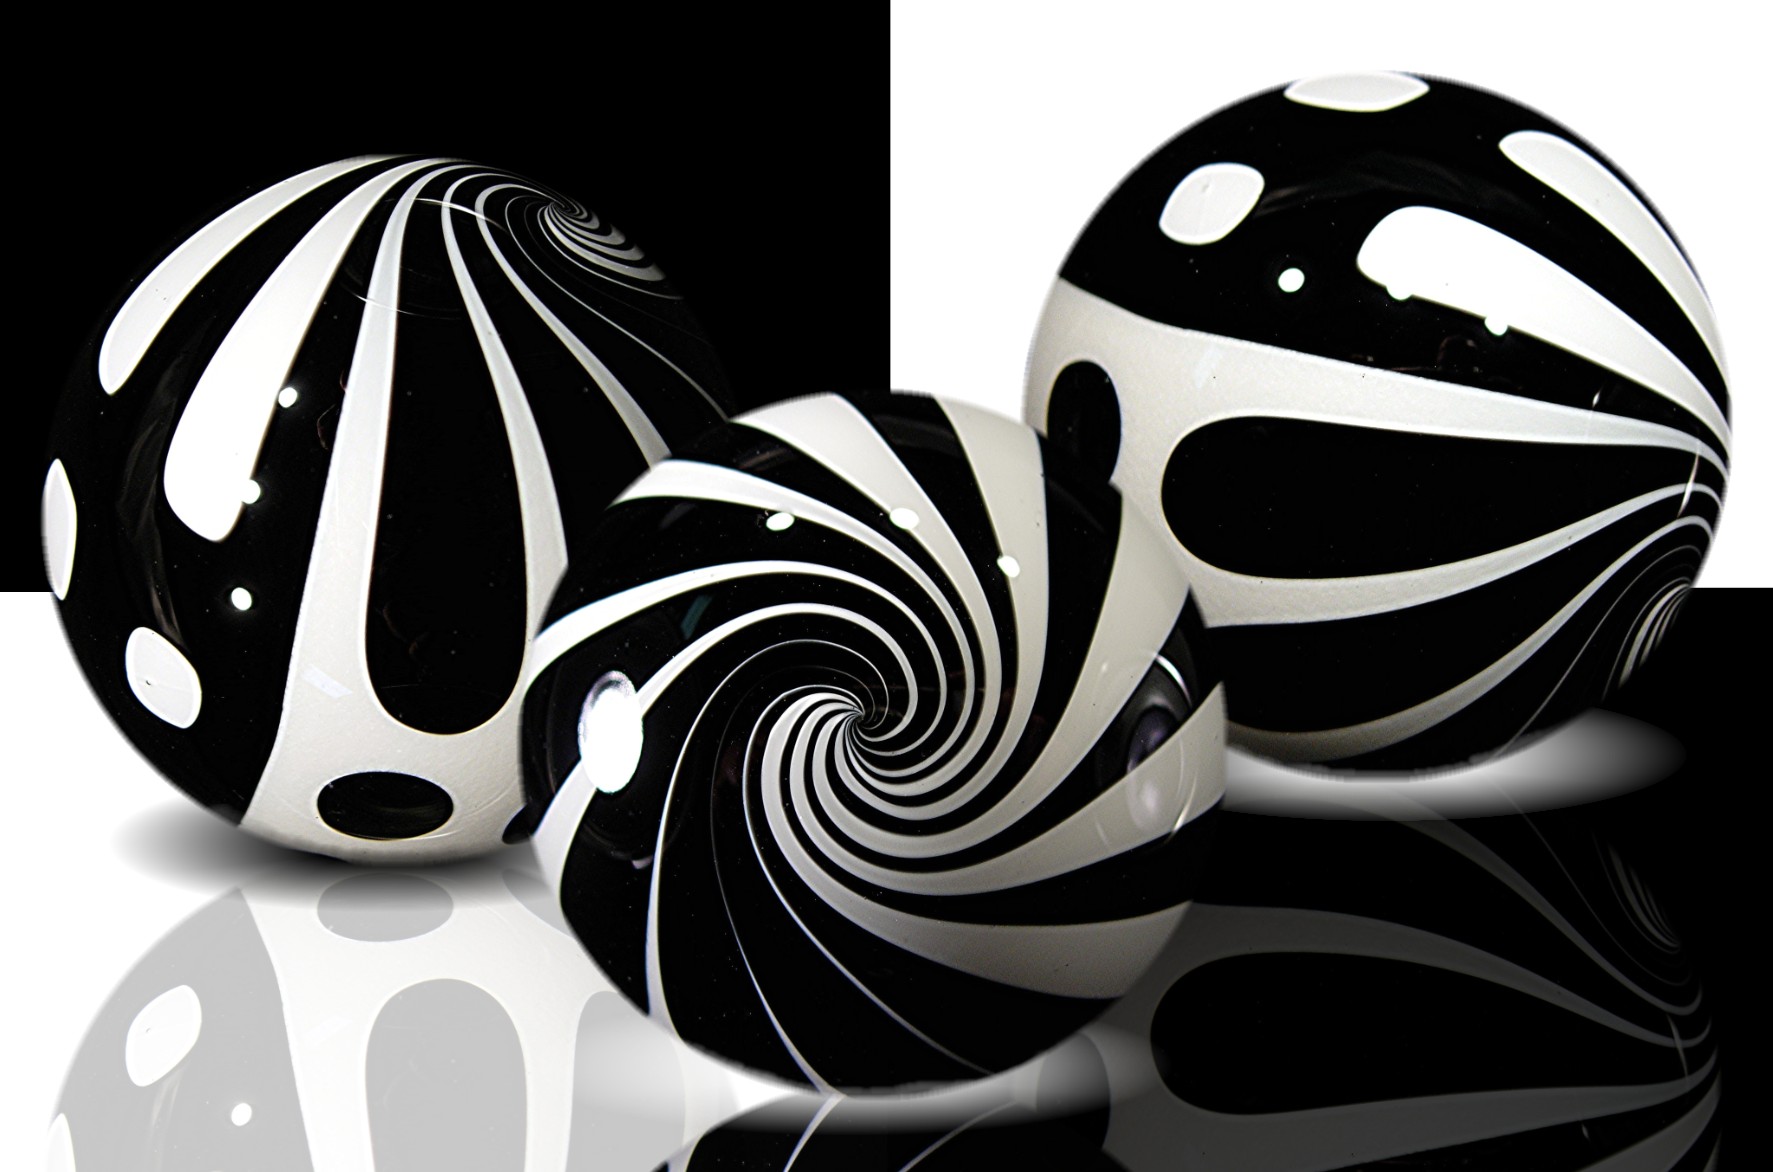 52 Hd Black And Whit - Black And White Marble Ball - HD Wallpaper 